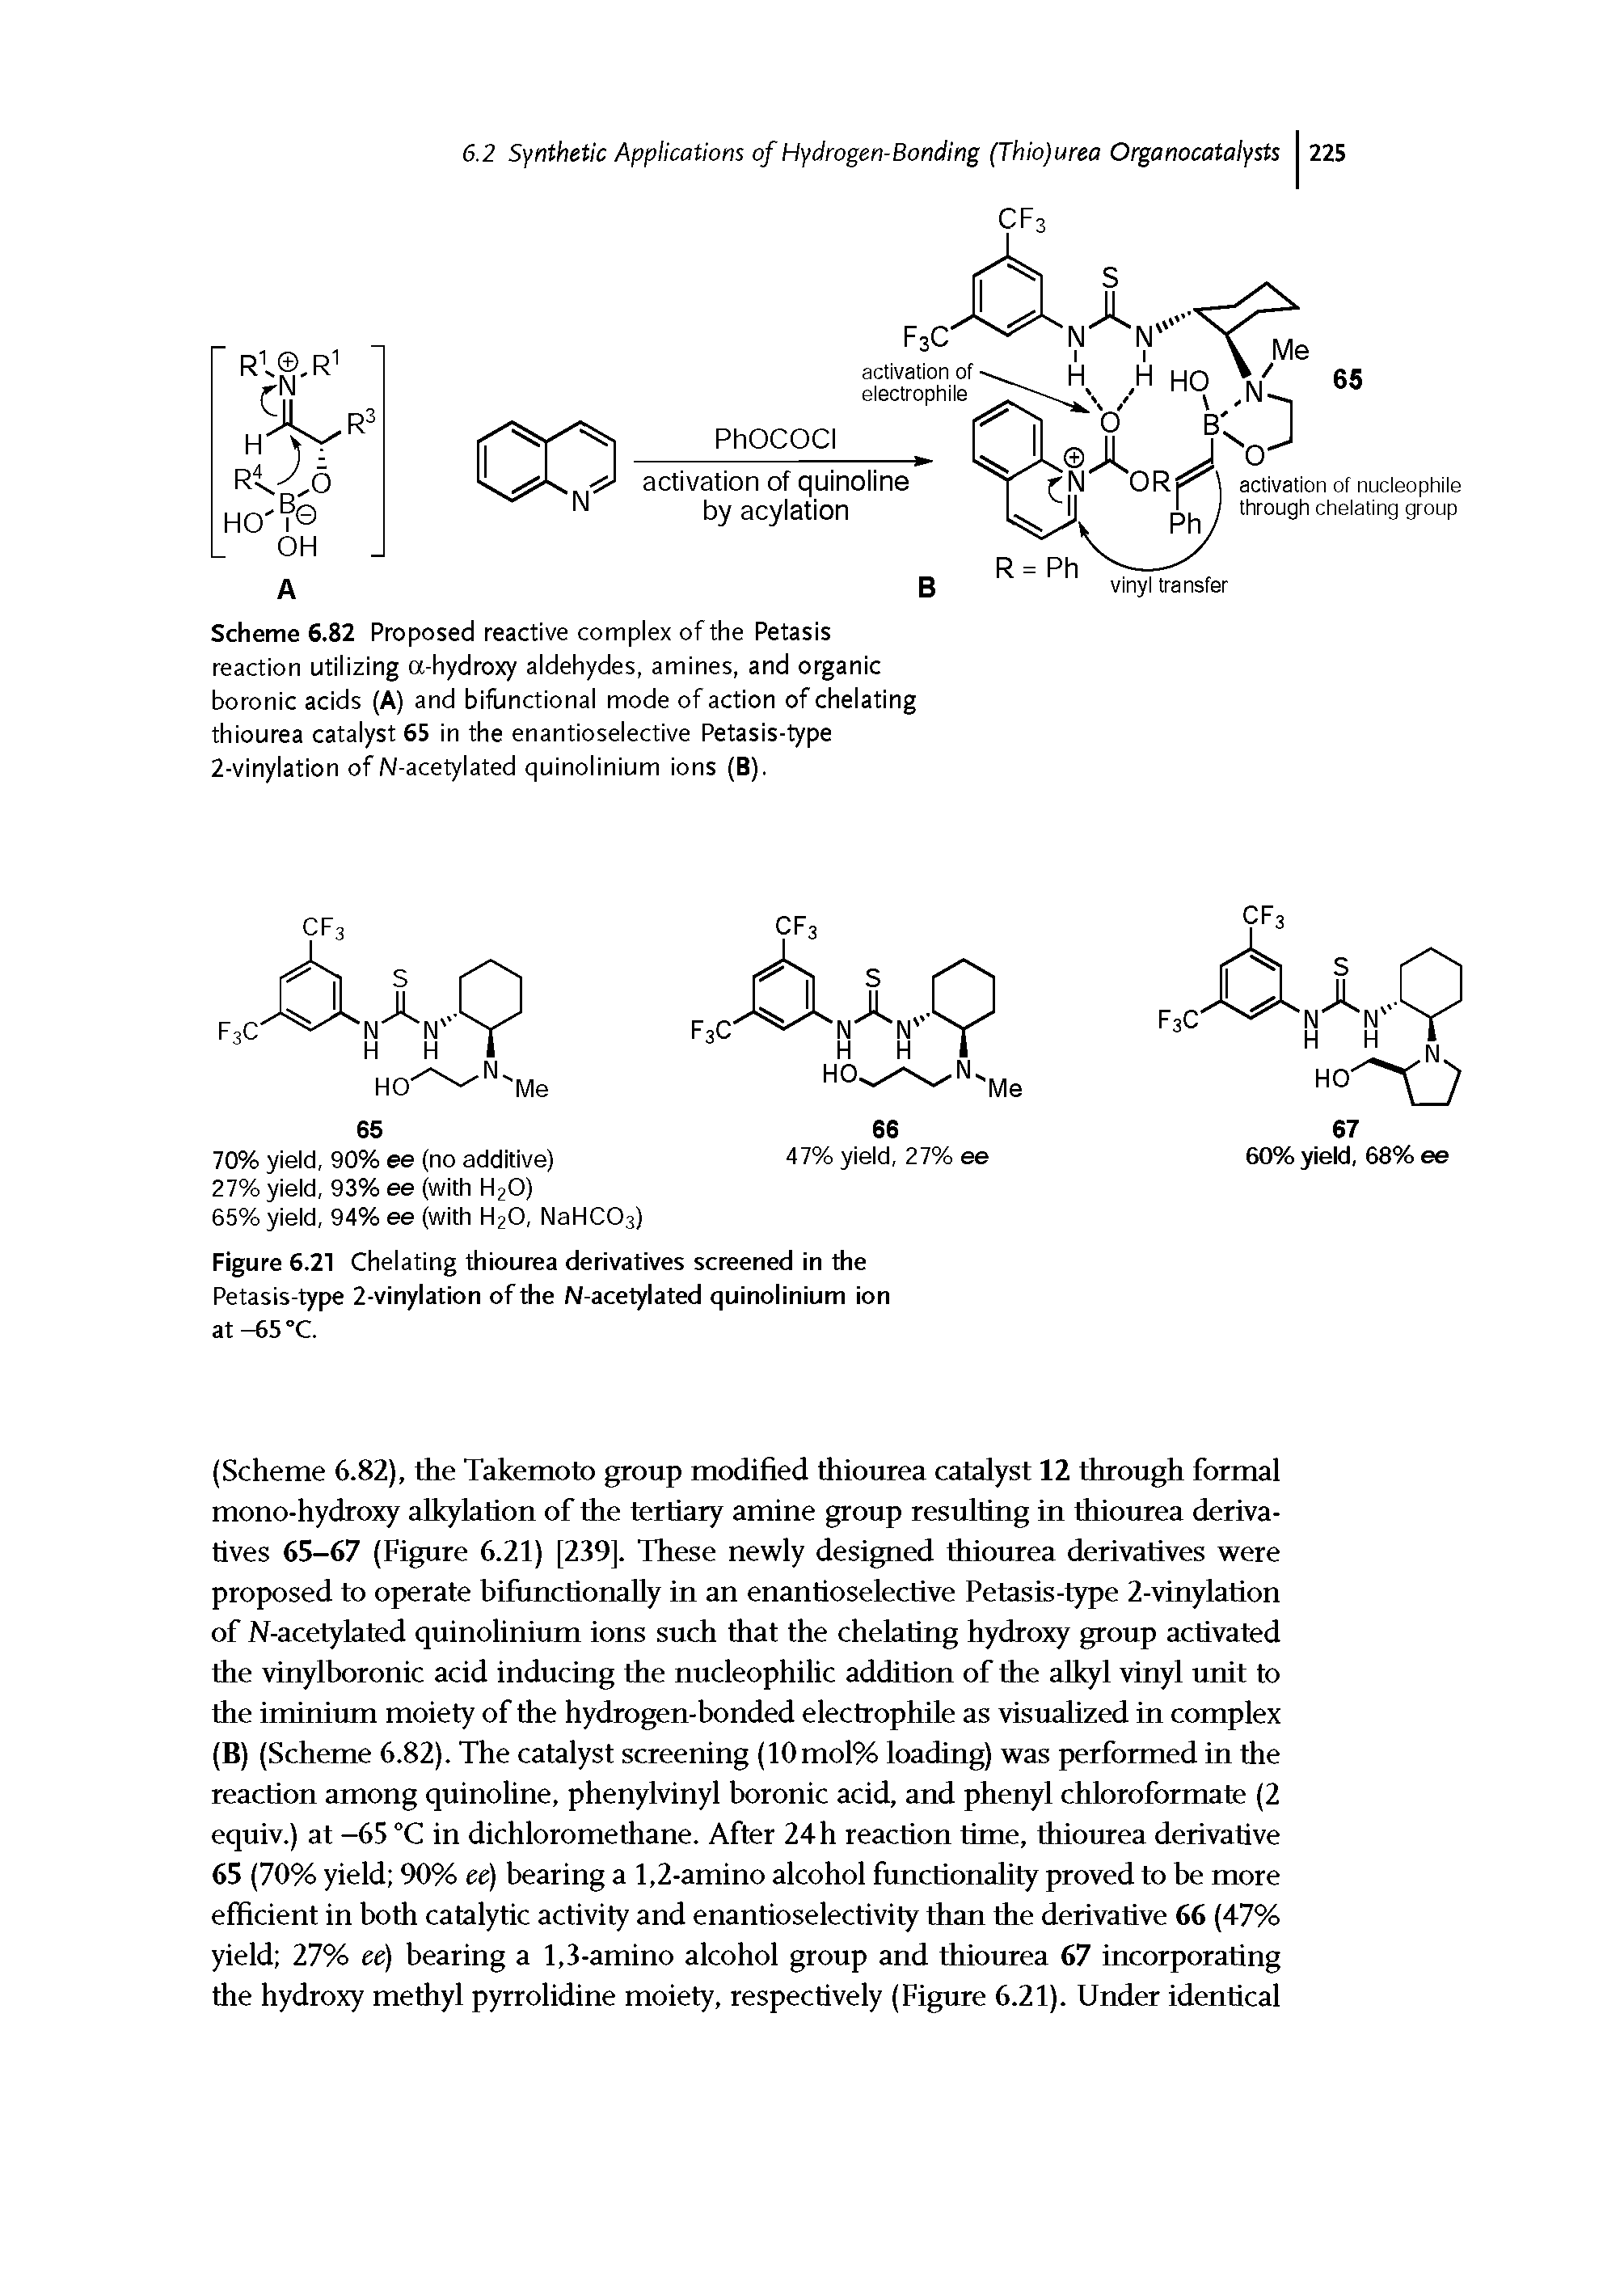 Scheme 6.82 Proposed reactive complex of the Petasis reaction utilizing a-hydroxy aldehydes, amines, and organic boronic acids (A) and bifunctional mode of action of chelating thiourea catalyst 65 in the enantioselective Petasis-type 2-vinylation of N-acetylated quinolinium ions (B).